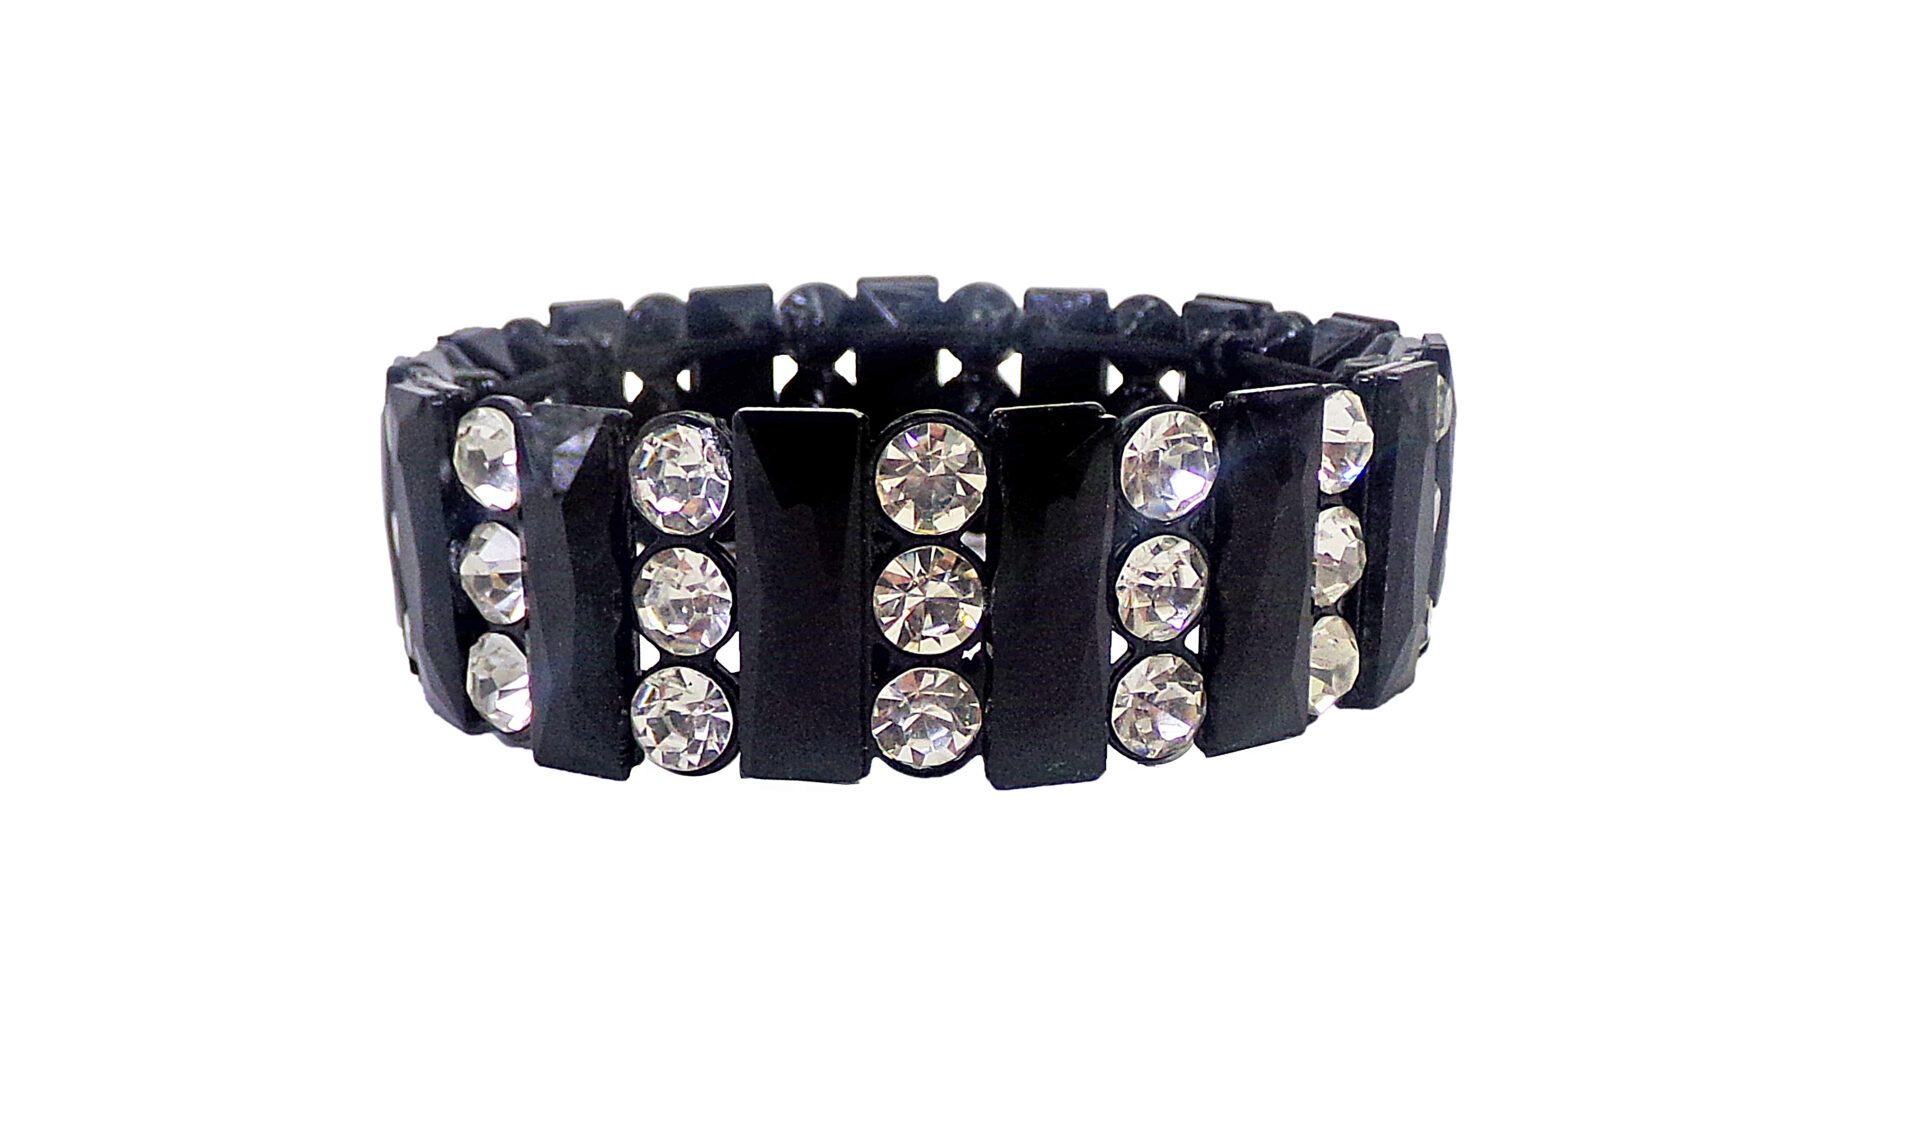 A Black Color Beaded Bracelet With White Stones